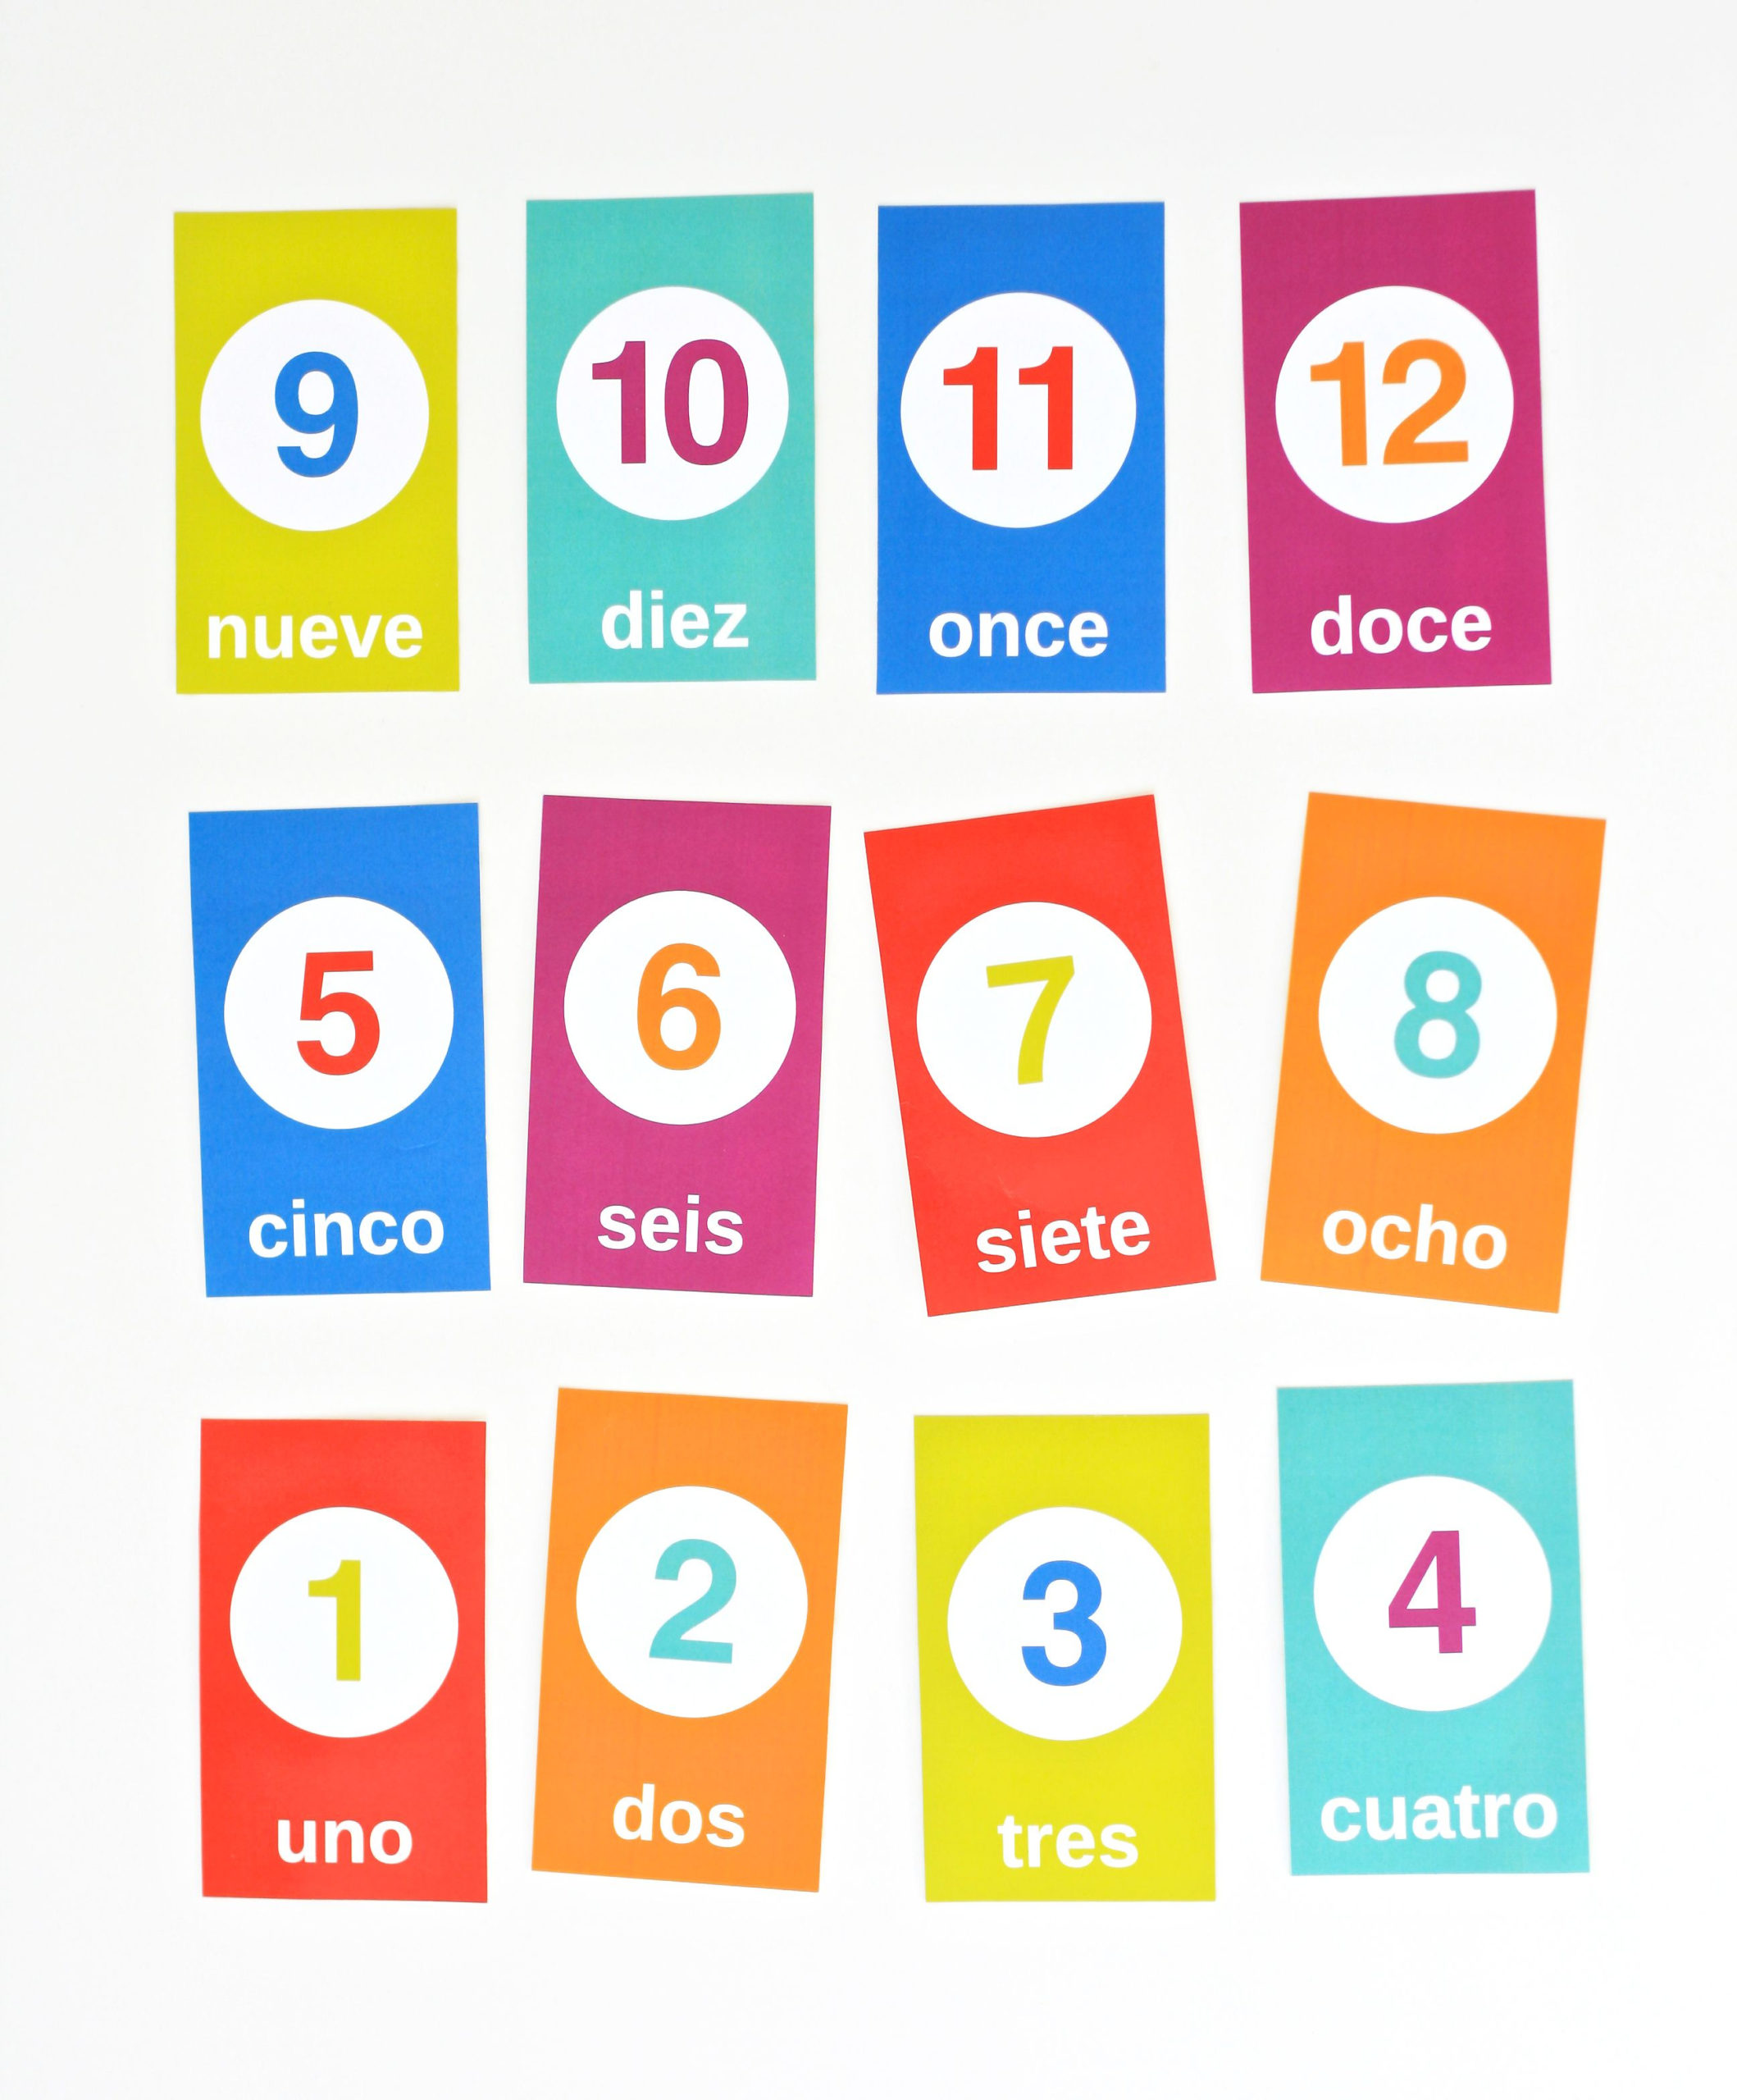 Free Flashcards For Counting In Spanish con Im genes 